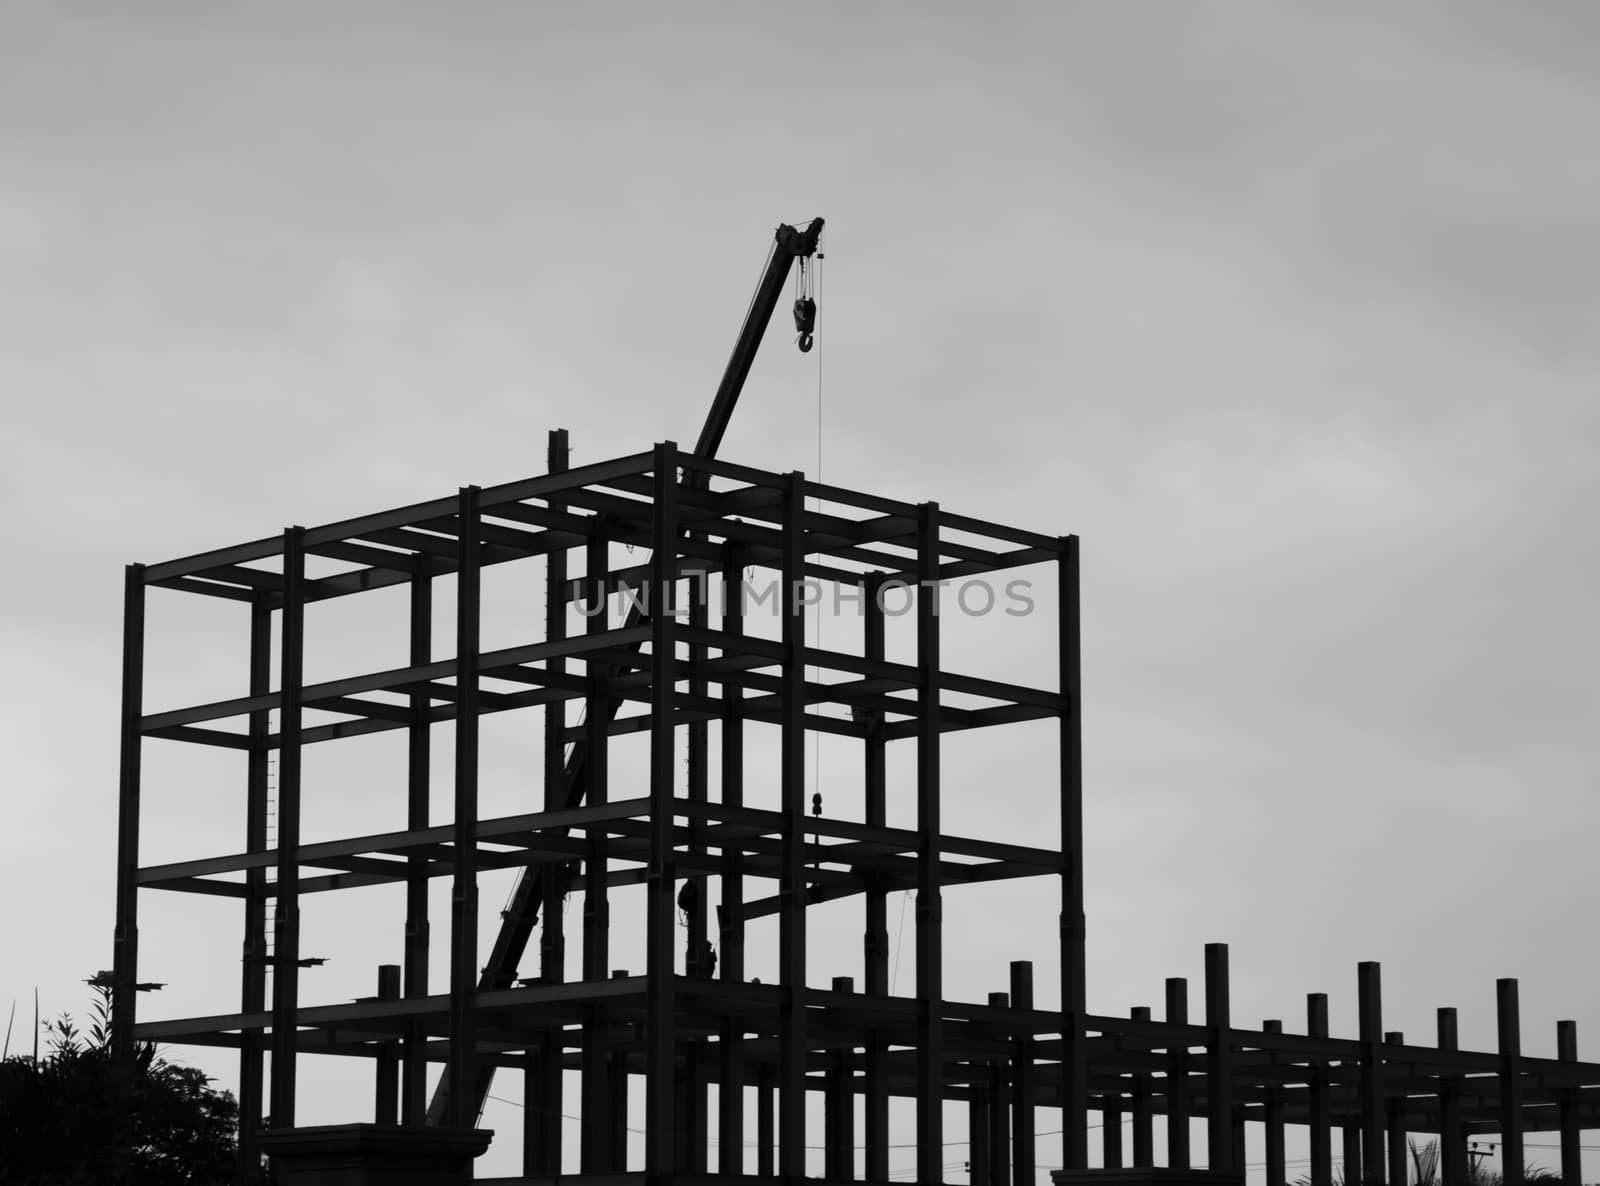 BLACK AND WHITE PHOTO OF SILHOUETTE CONSTRUCTION CRANE